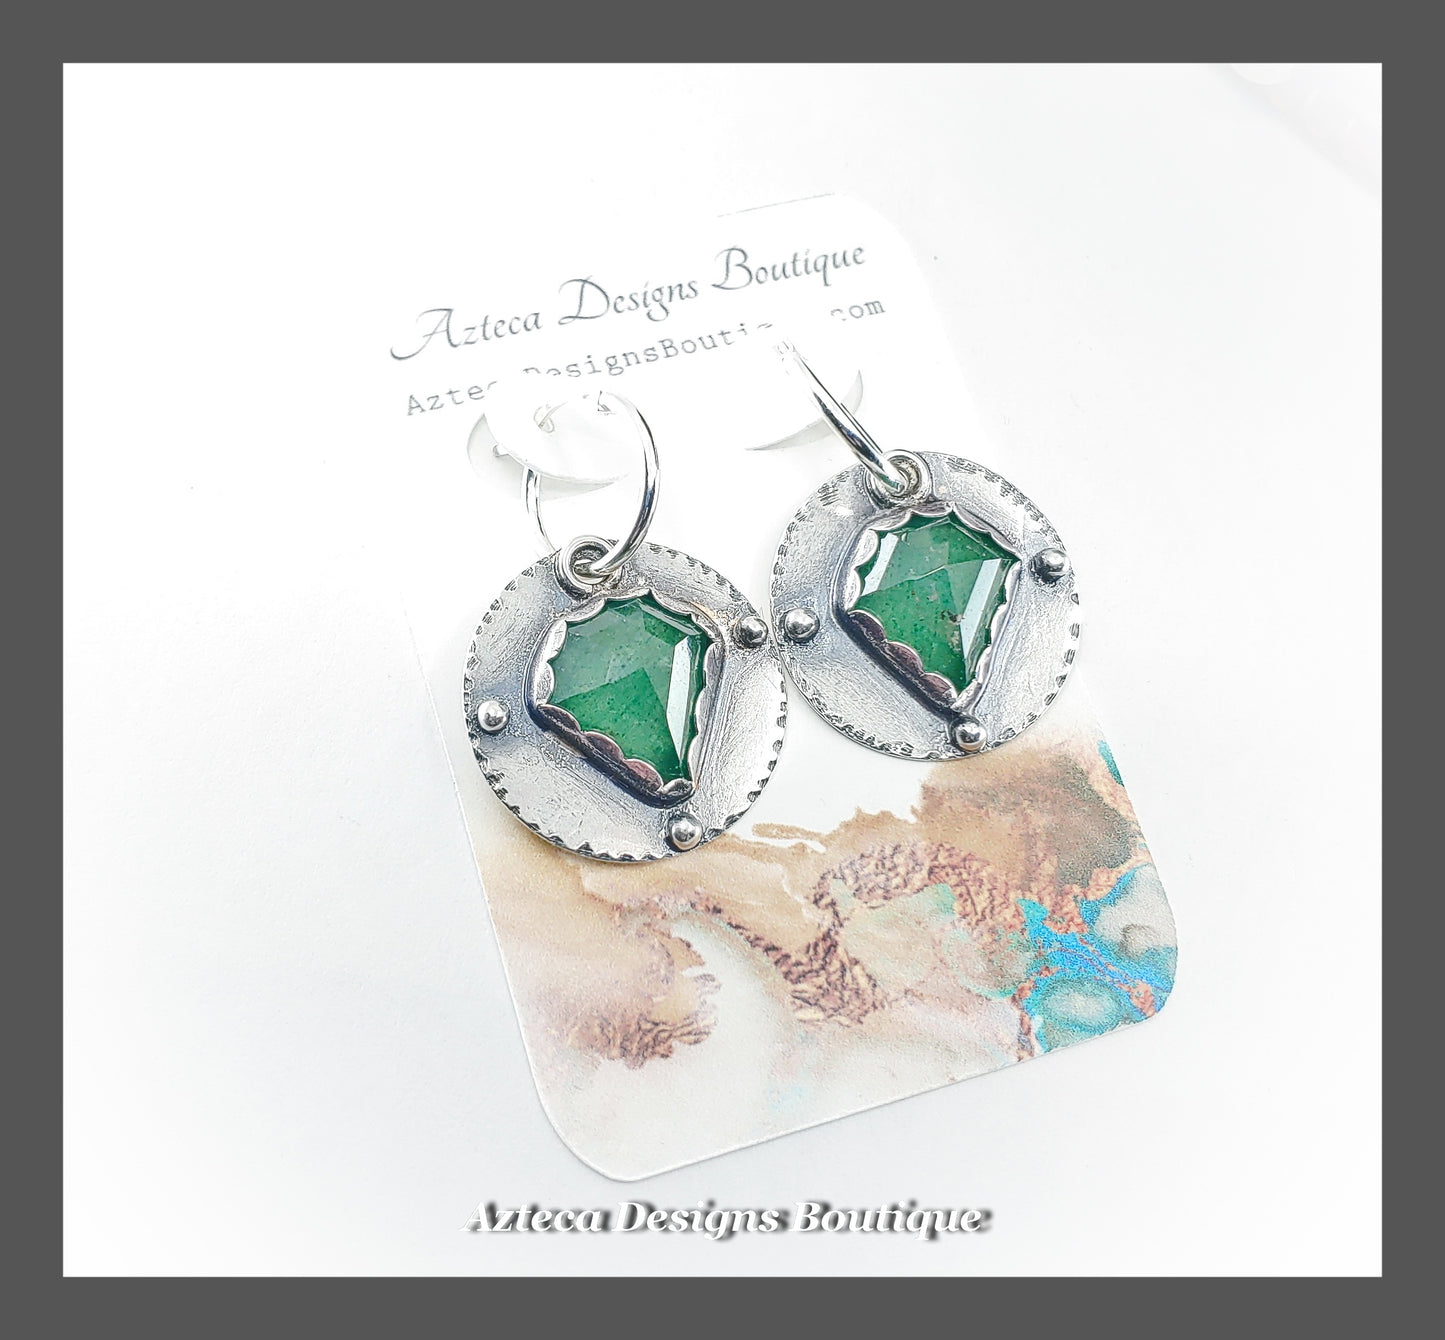 Green Strawberry Quartz Sterling Silver Hand Fabricated Earrings